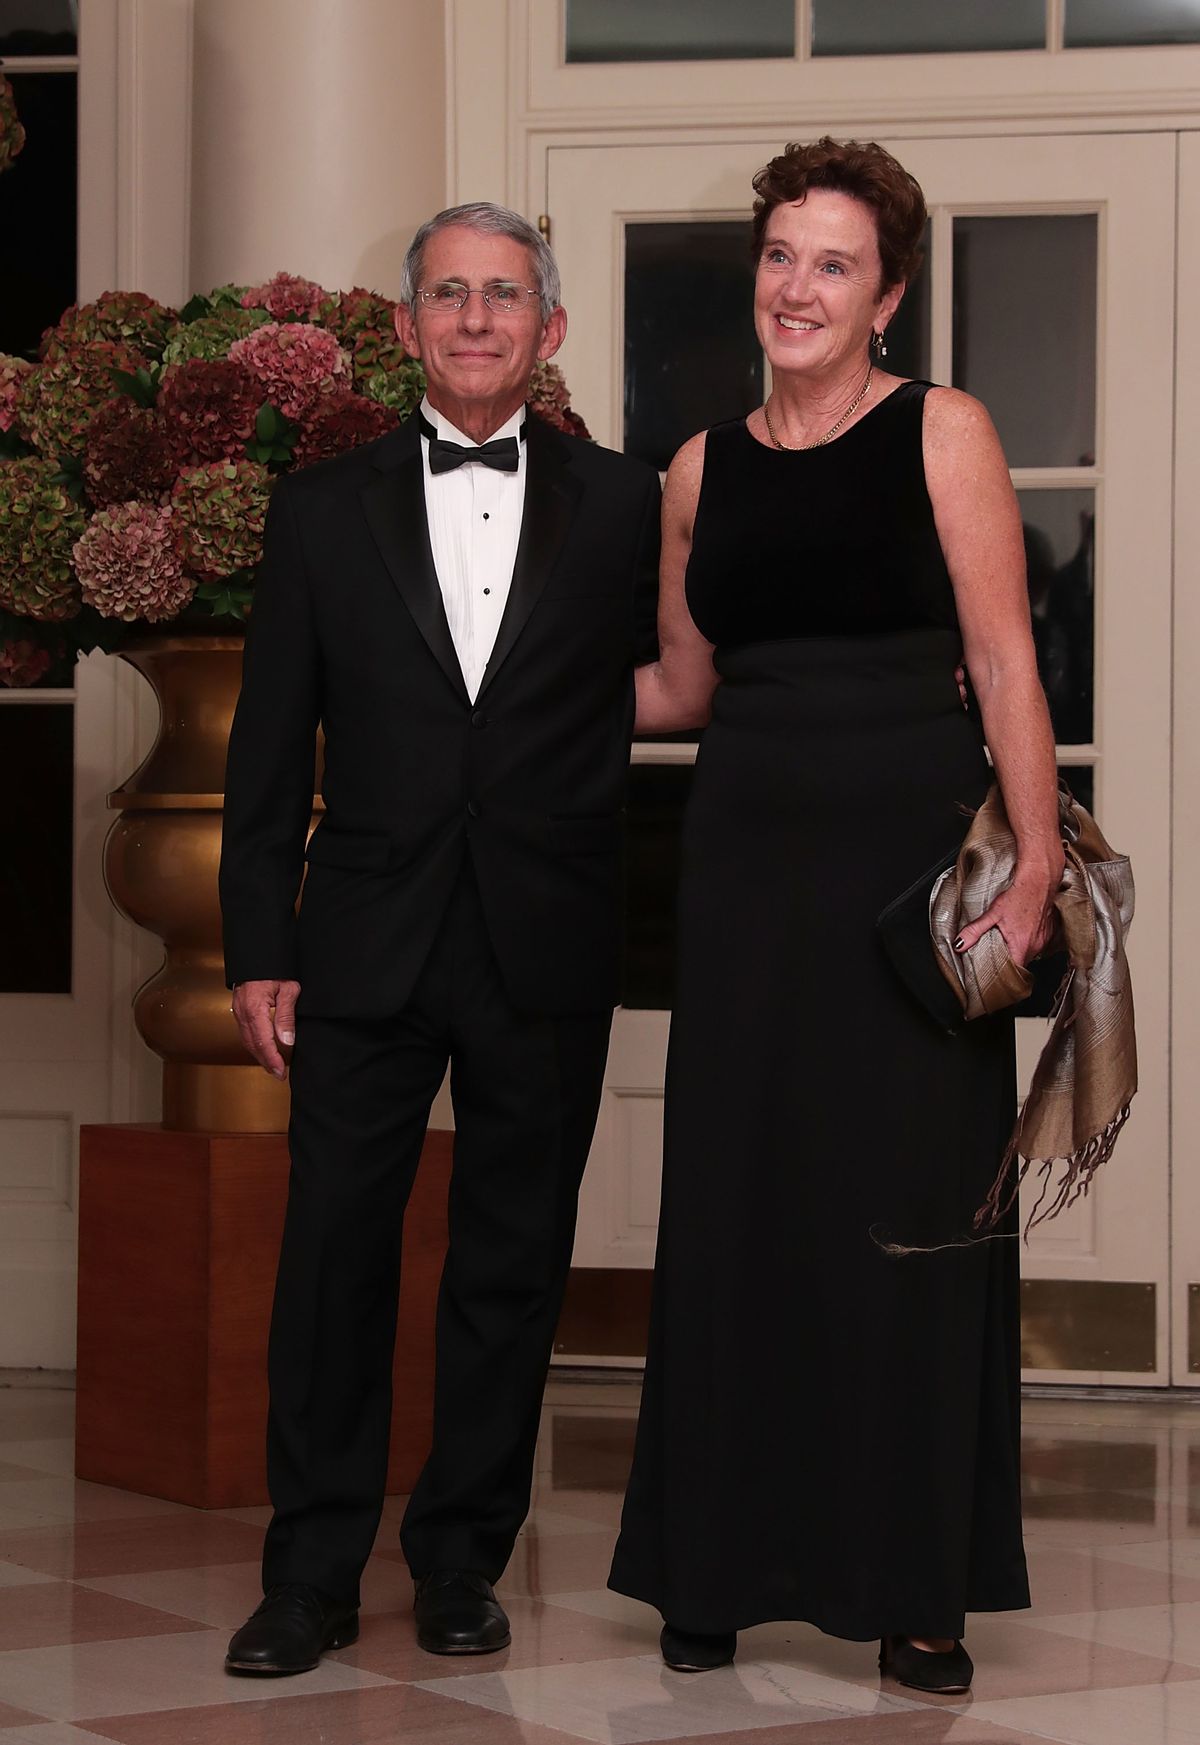 WASHINGTON, DC - OCTOBER 18:  Director of the National Institute of Allergy &amp; Infectious Diseases at the National Institute of Health Anthony Fauci and his wife Christine Grady arrive at the White House for a state dinner October 18, 2016 in Washington, DC. U.S. President Barack Obama is hosting a state dinner for Prime Minister of Italy Matteo Renzi and his wife Agnese Landini.  (Photo by Alex Wong/Getty Images) (Alex Wong/Getty Images)